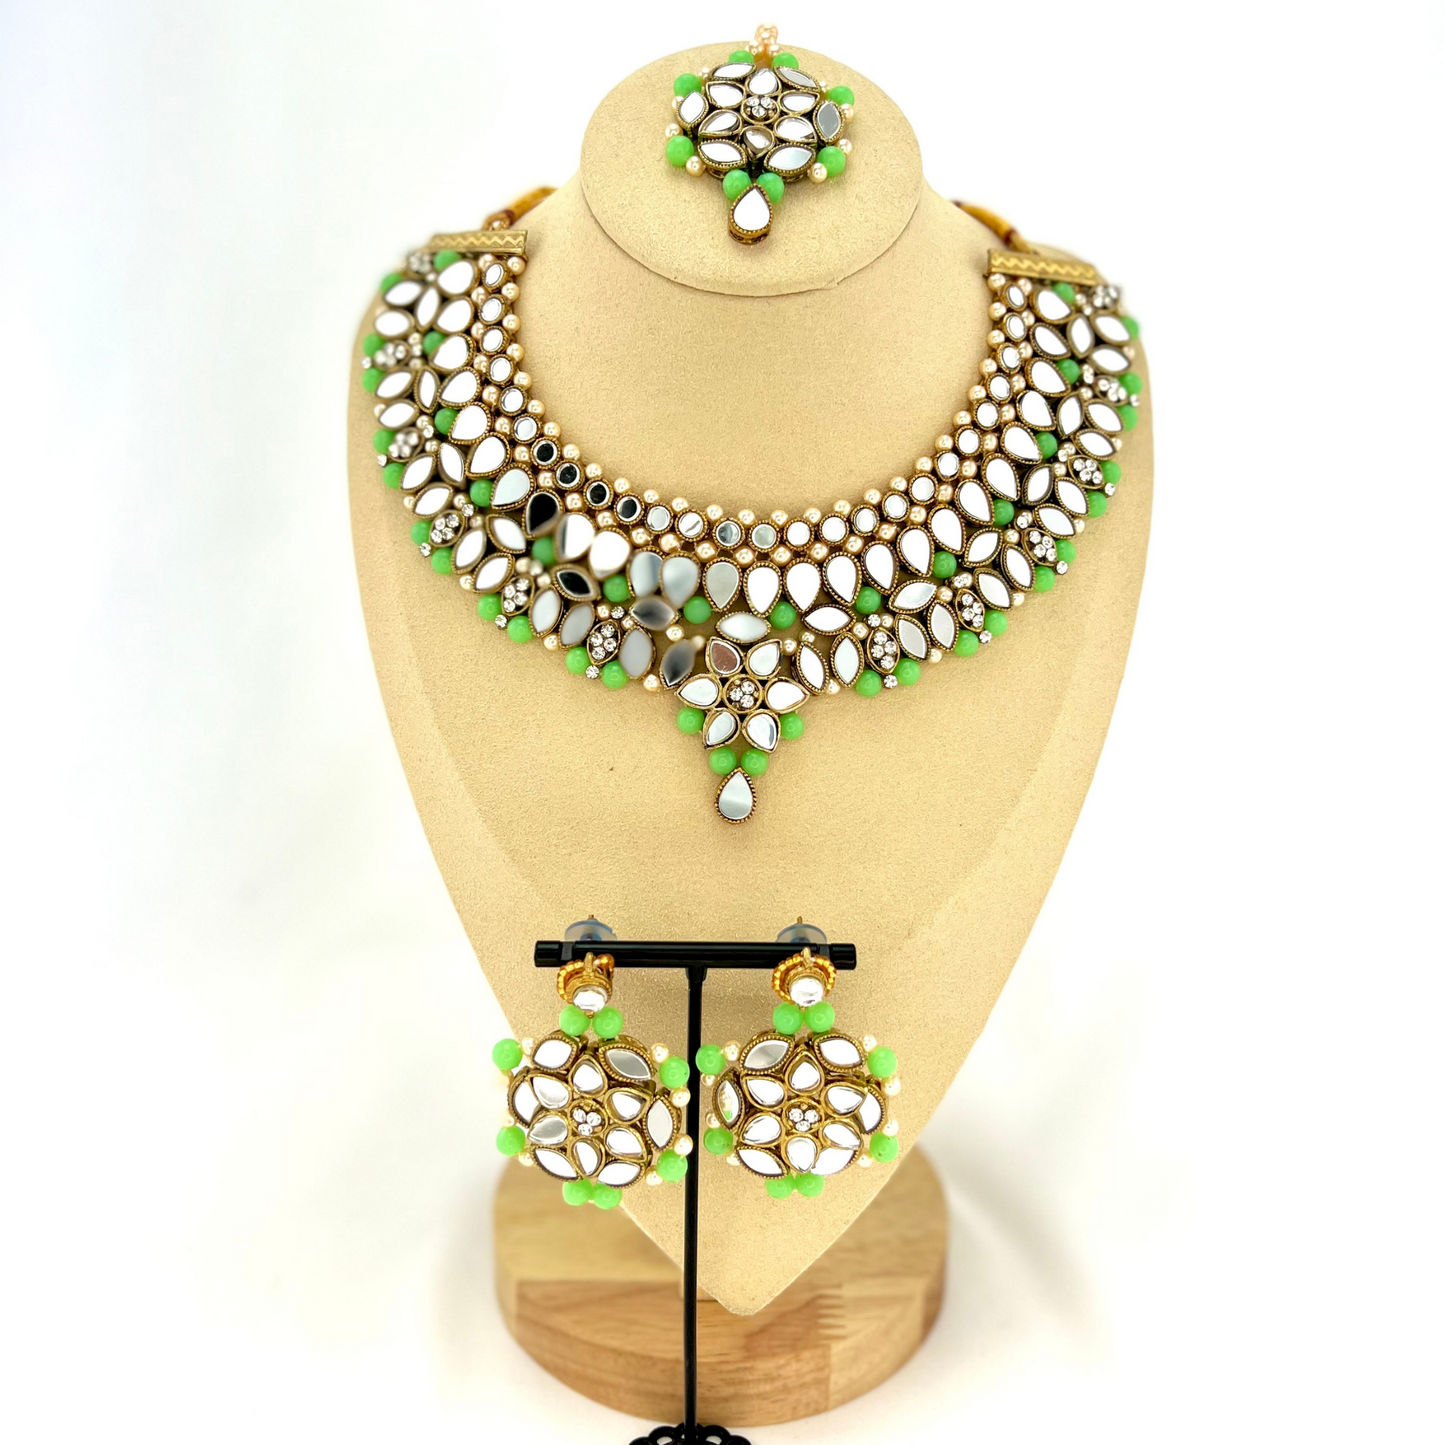 Mirror necklace set with green beads, clear stones and pearls.  Set includes, necklace, tikka and earrings.  Prefect for Indian weddings, parties and special occasions.  Latest 2022 fashion. High end Indian fashion jewellery with top quality stones and beads.